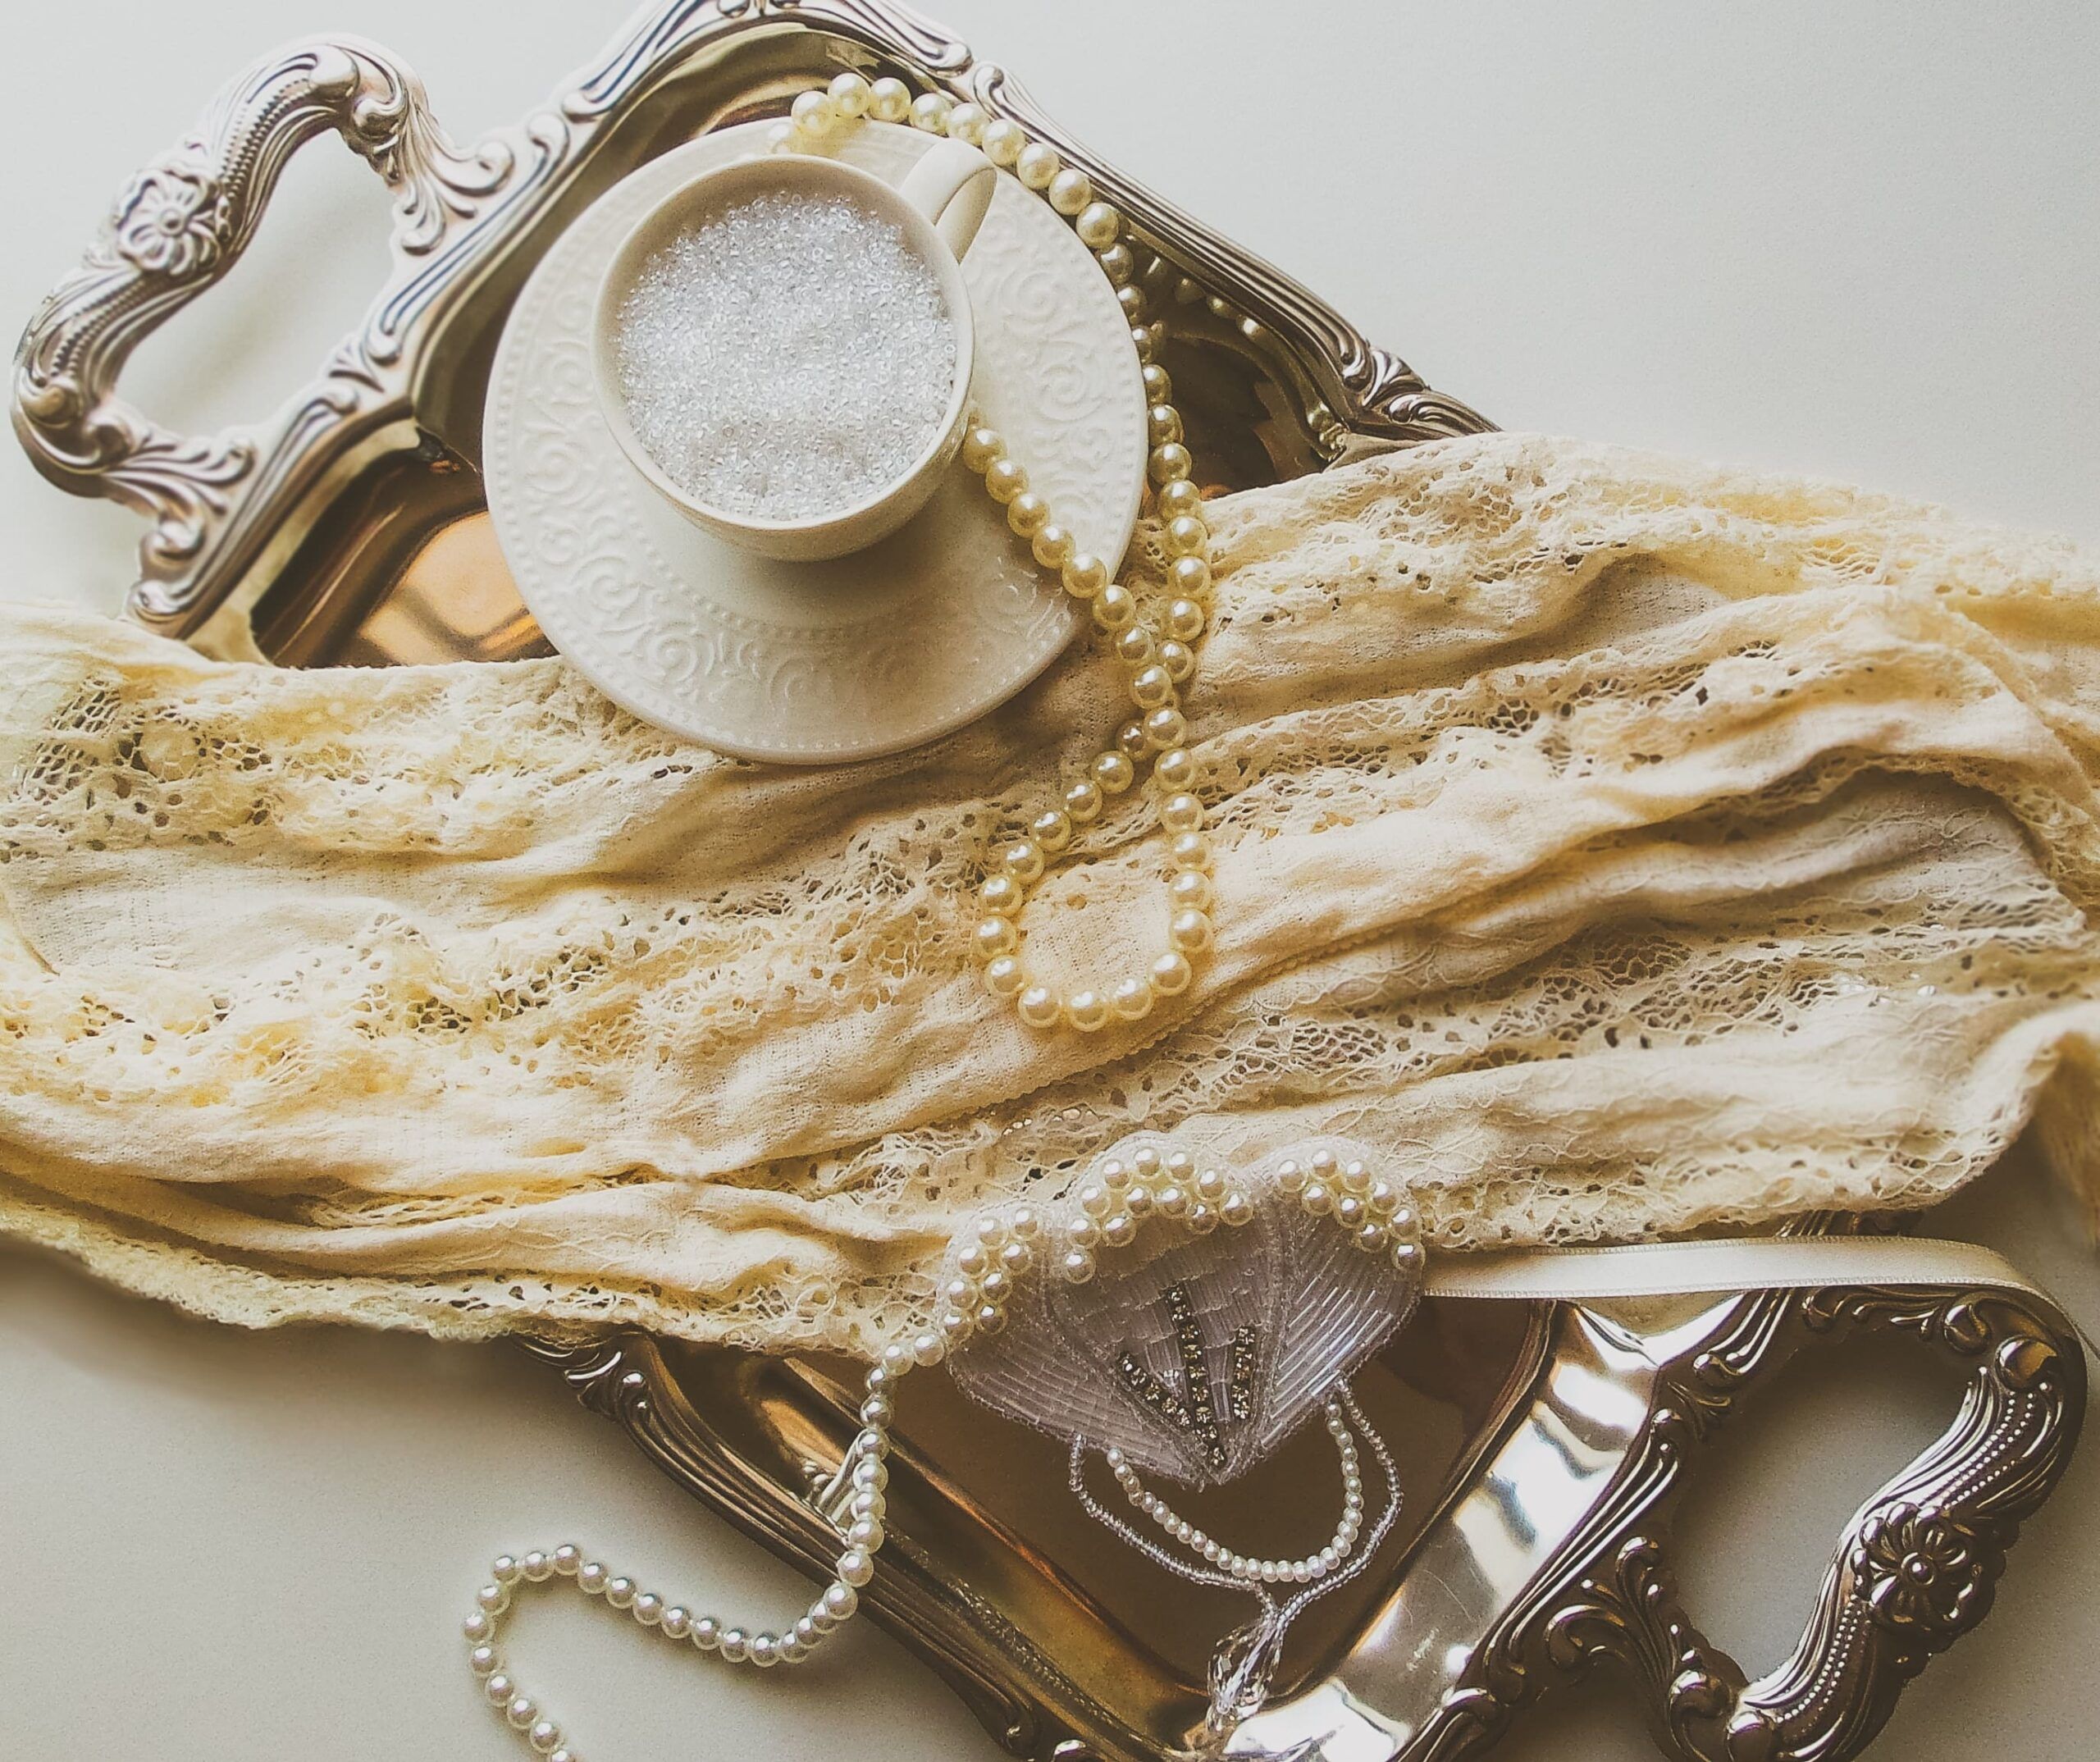 A tray with pearls and tea on it - Light academia, flat lay